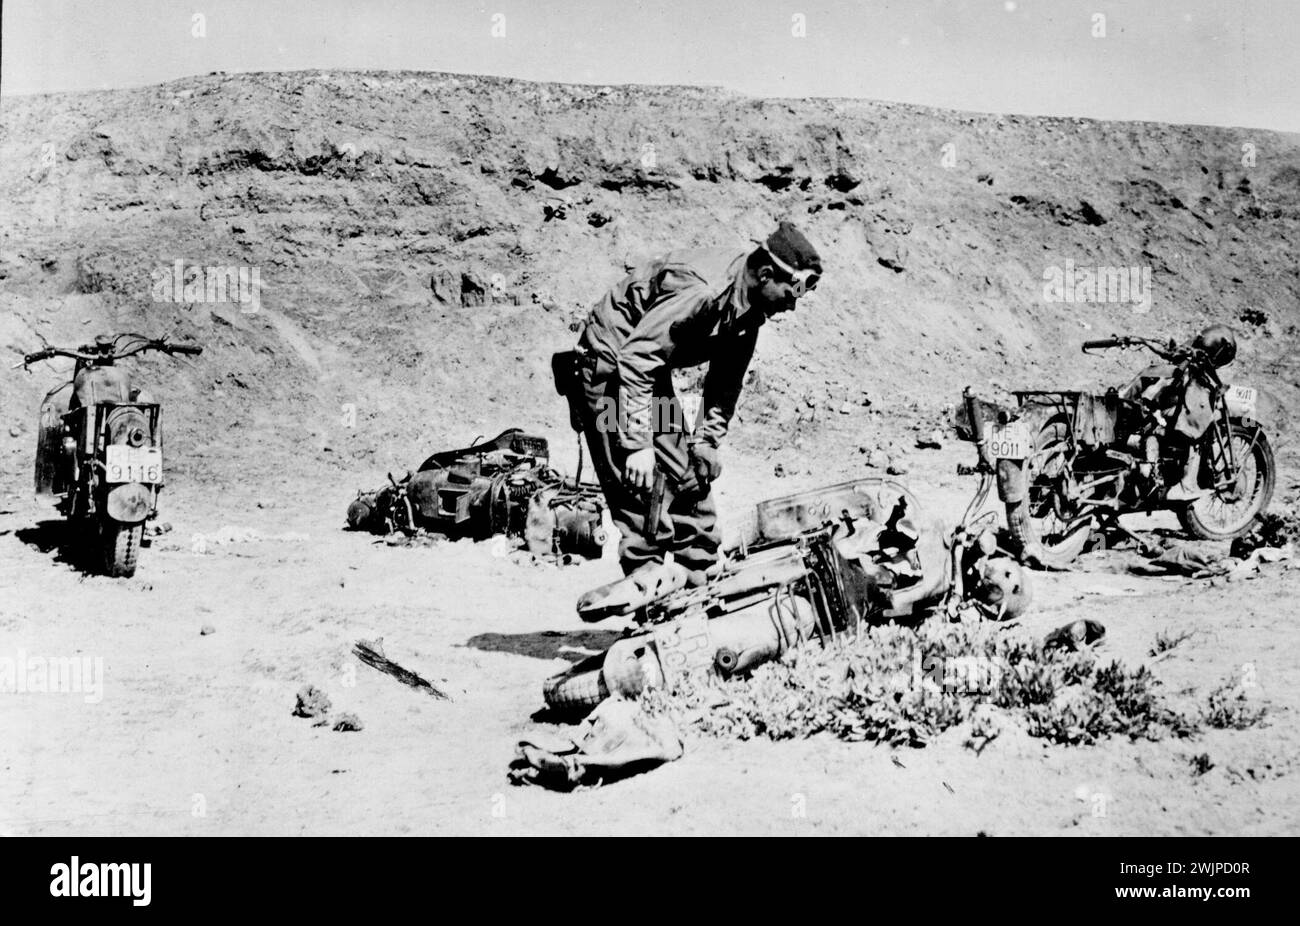 Axis Equipment Captured In Tunisia -- A U.S. soldier examines Italian motorcycles hurriedly abandoned by Axes forces fleeing before a U.S. Army attack in Tunisia. June 21, 1943. (Photo by U.S. Office of War Information Picture). Stock Photo